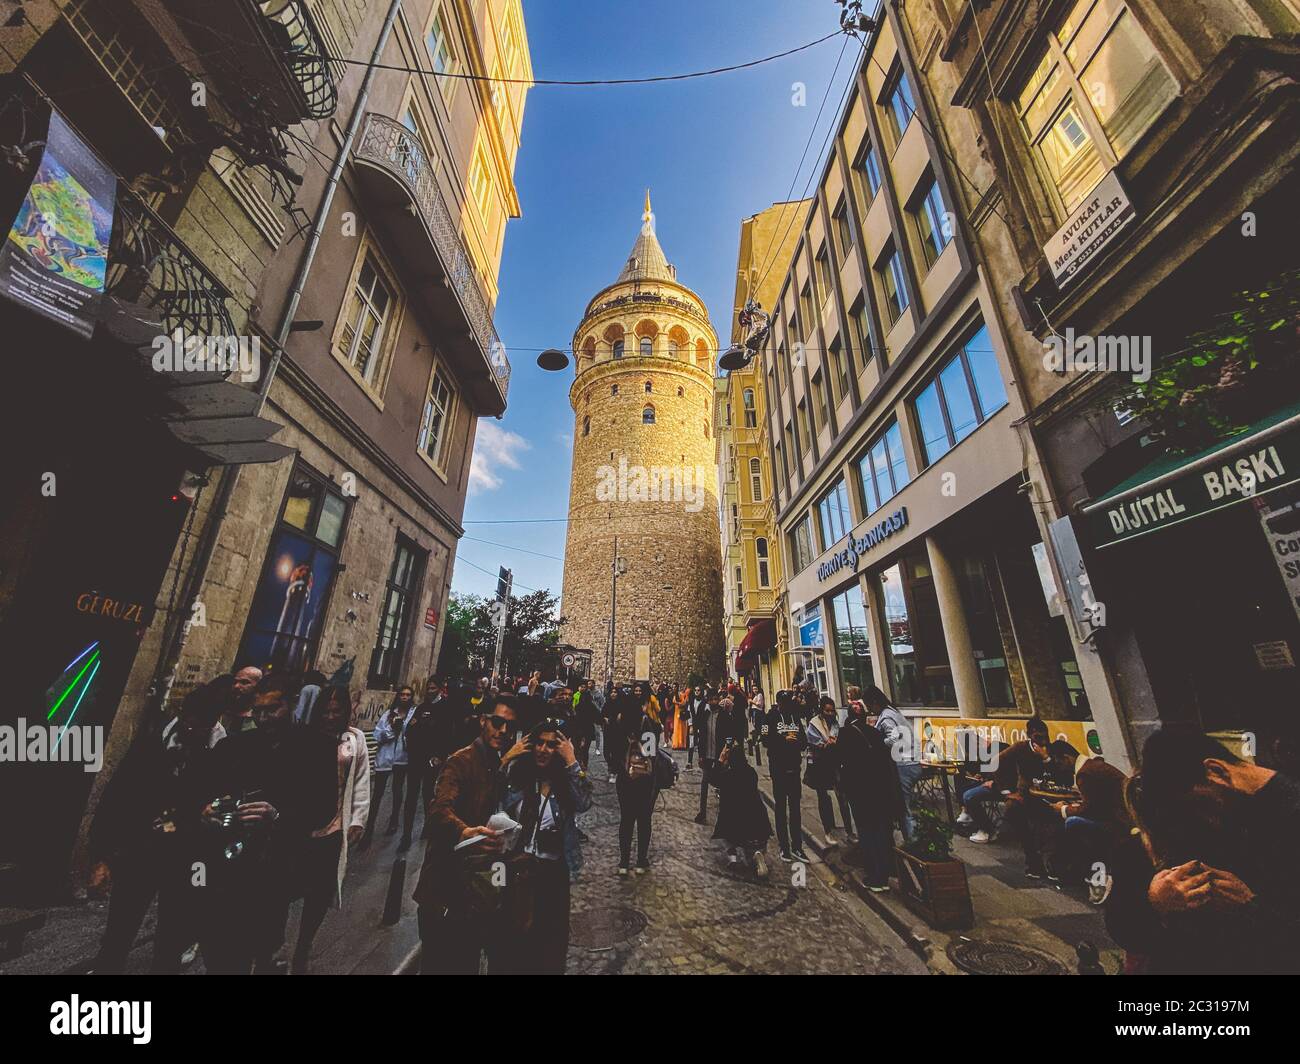 Galata Tower and the street in the Old Town of Istanbul, Turkey October 27, 2019. BELTUR Galata Kulesi or Galata tower in the ol Stock Photo